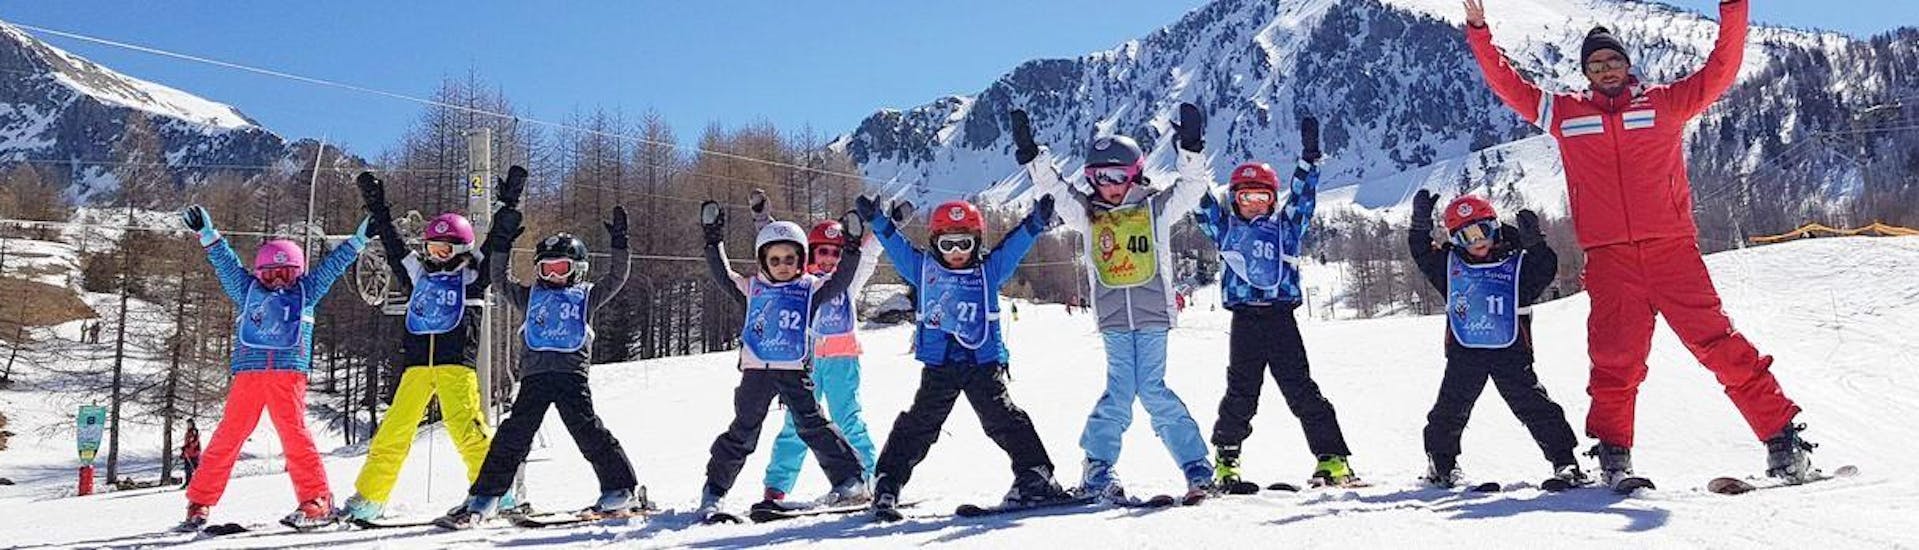 Kids are standing next to each other at the bottom of a slope, happy to start learning how to ski during their Kids Ski Lessons (7-12 y.) for All Levels with the ski school ESF Isola 2000.